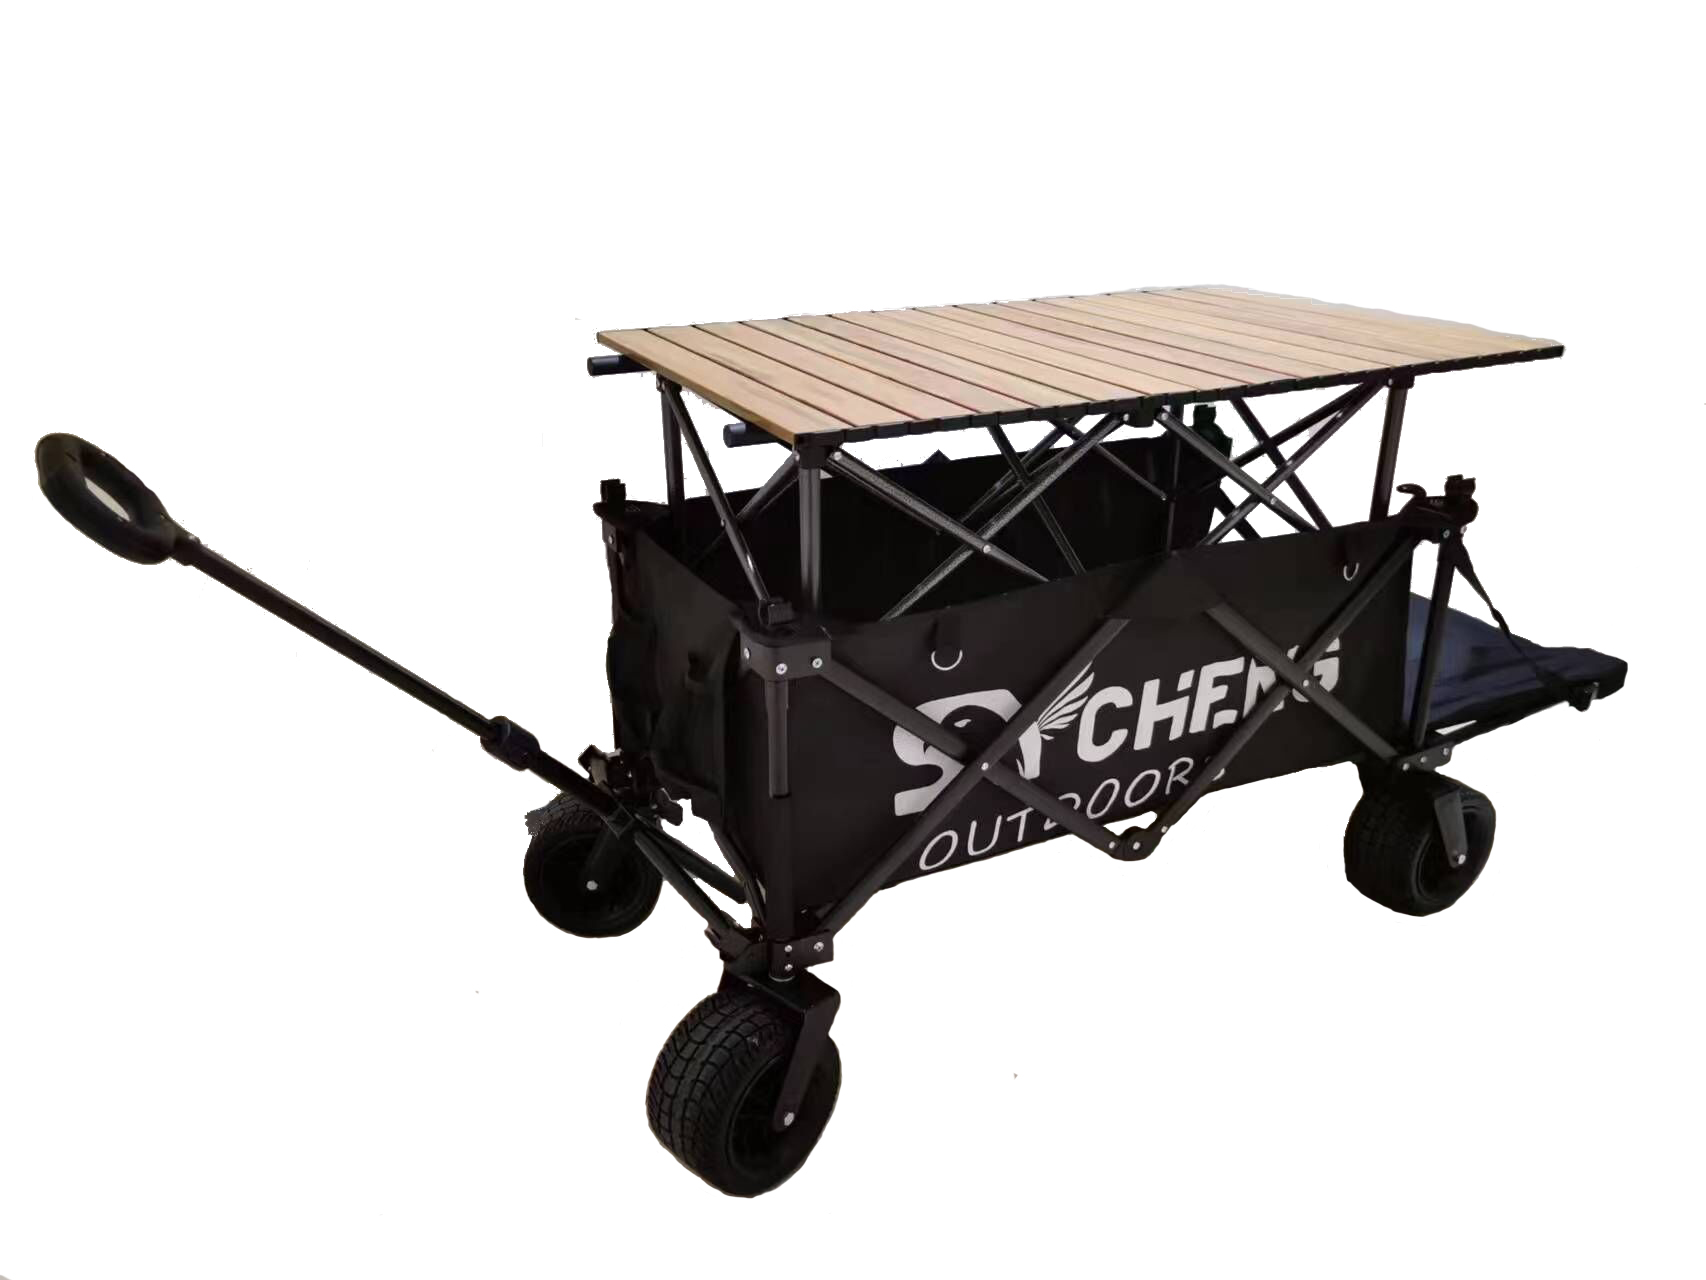 SYCHENG Camping Folding Wagon, Wagon Cart Heavy Duty Foldable, Utility Grocery Wagon for Camping Shopping Sports